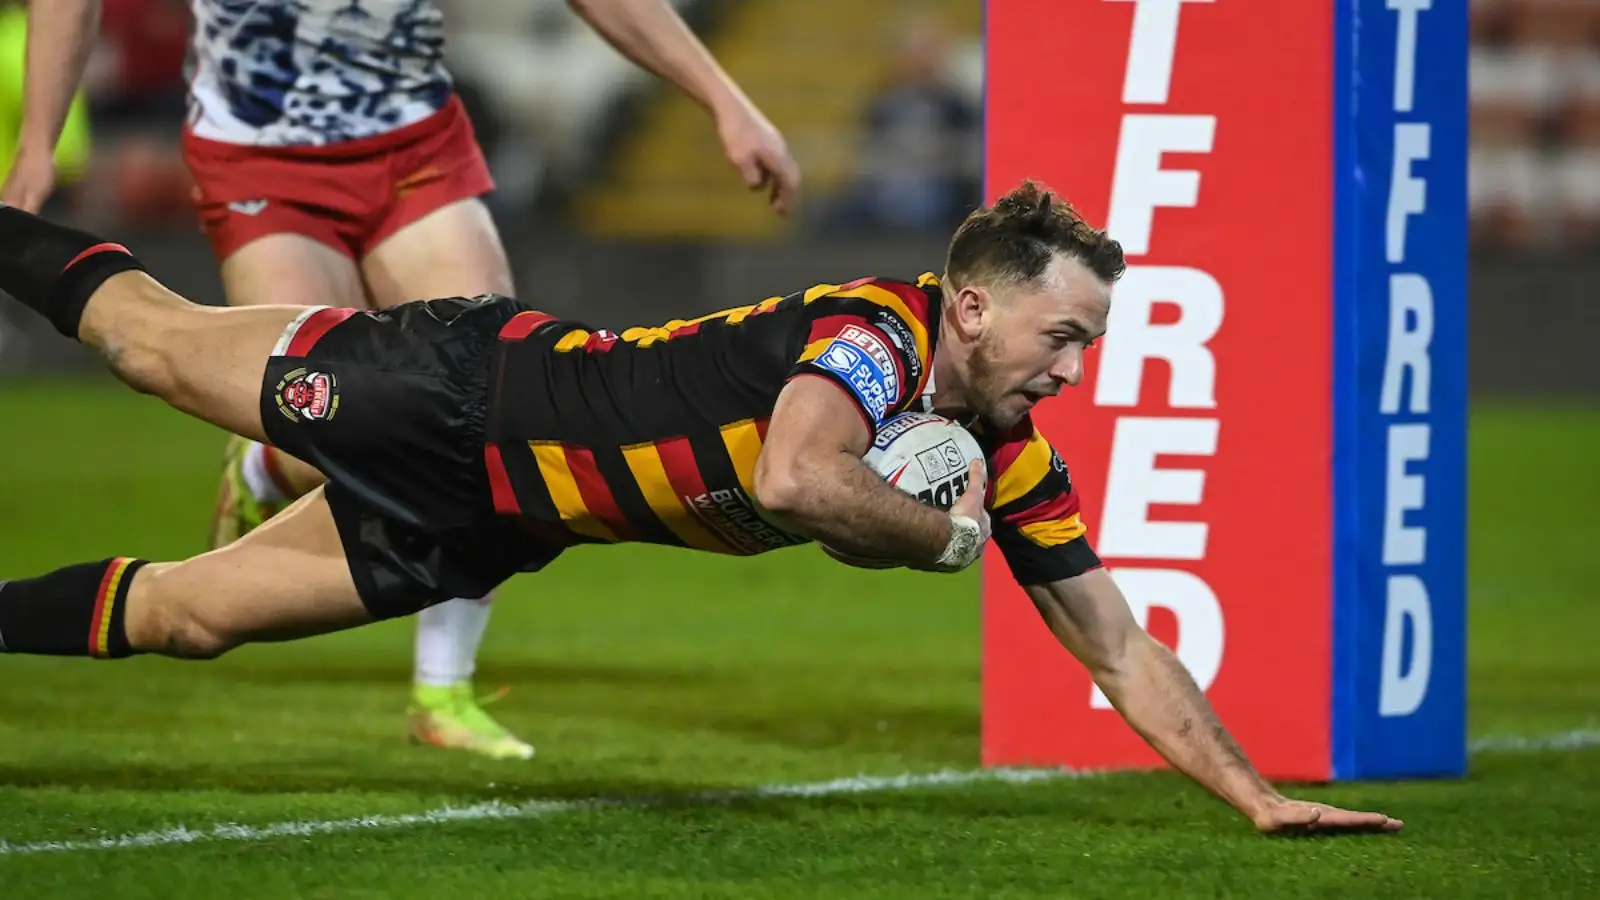 Salford star Ryan Brierley pays ultimate compliment to former club Leigh